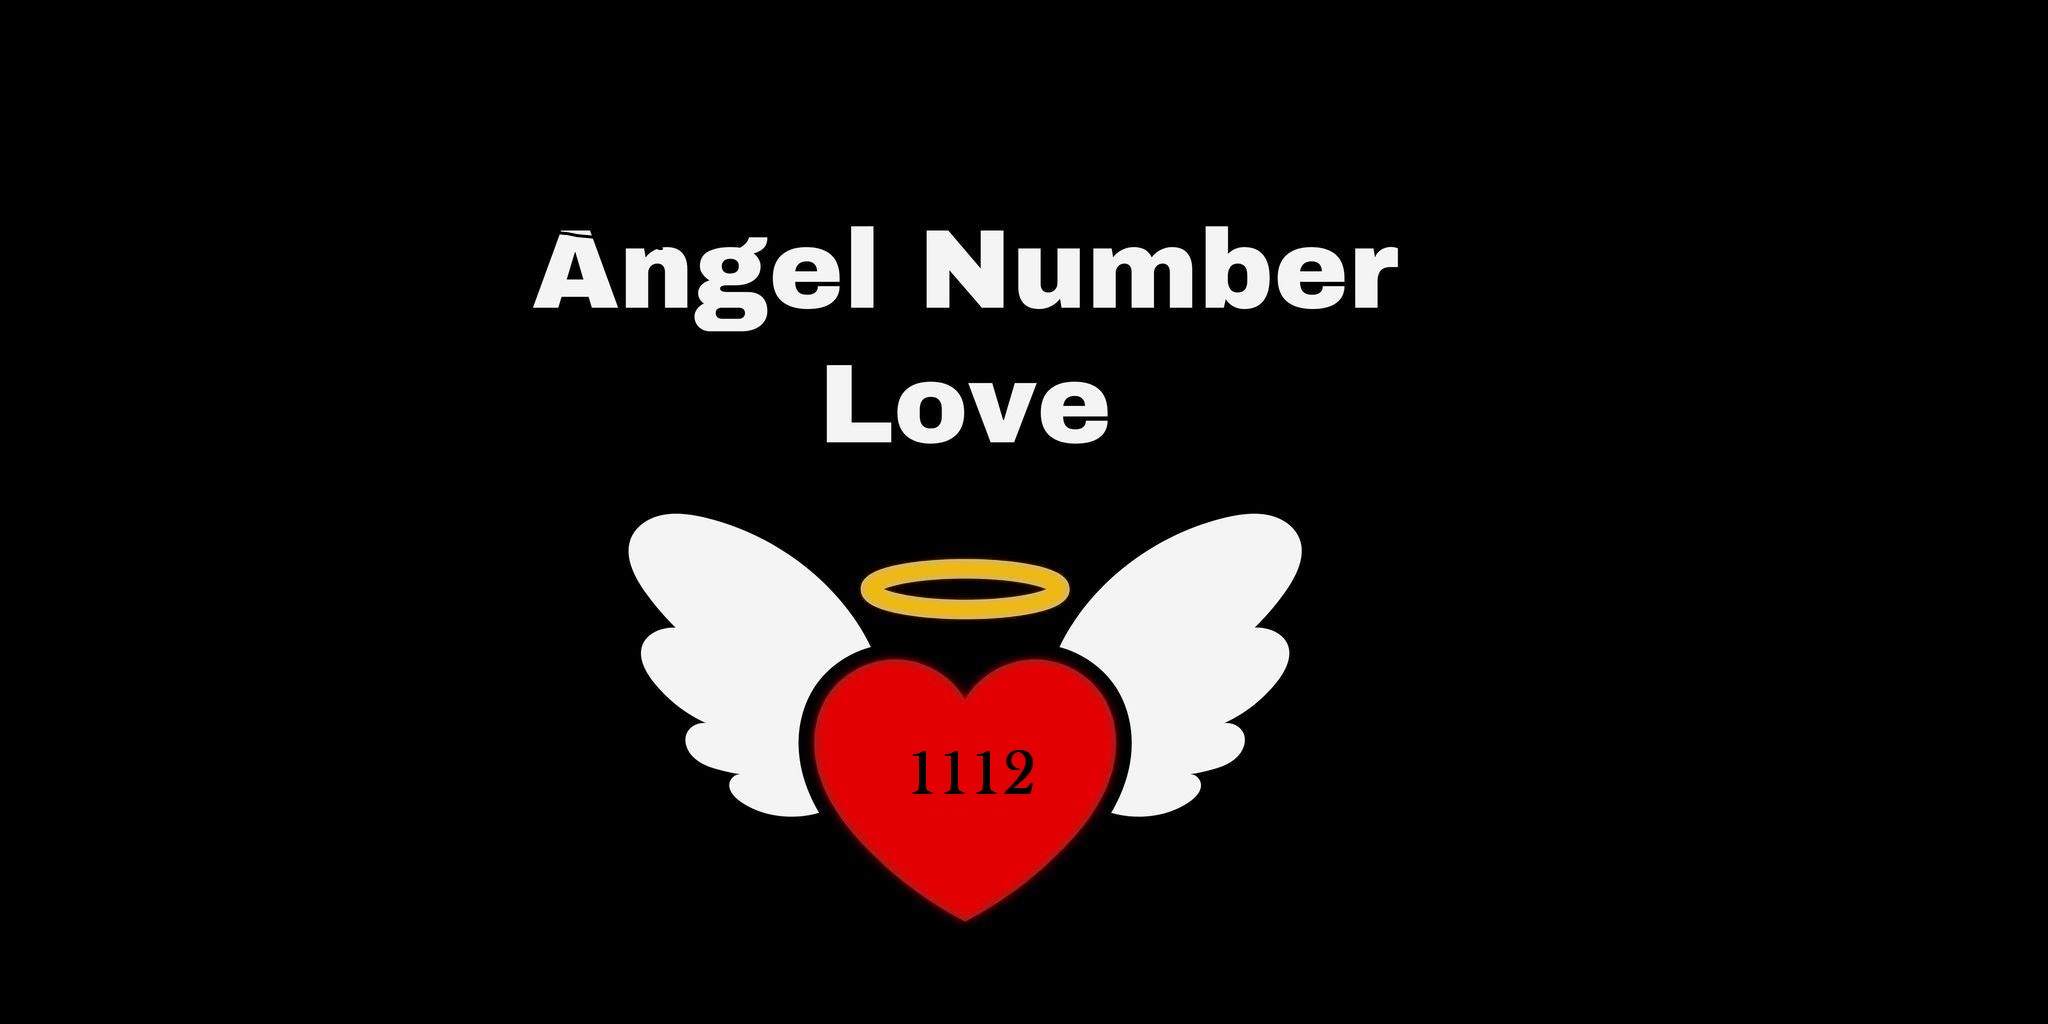 1112 Angel Number Meaning In Love & Relationship